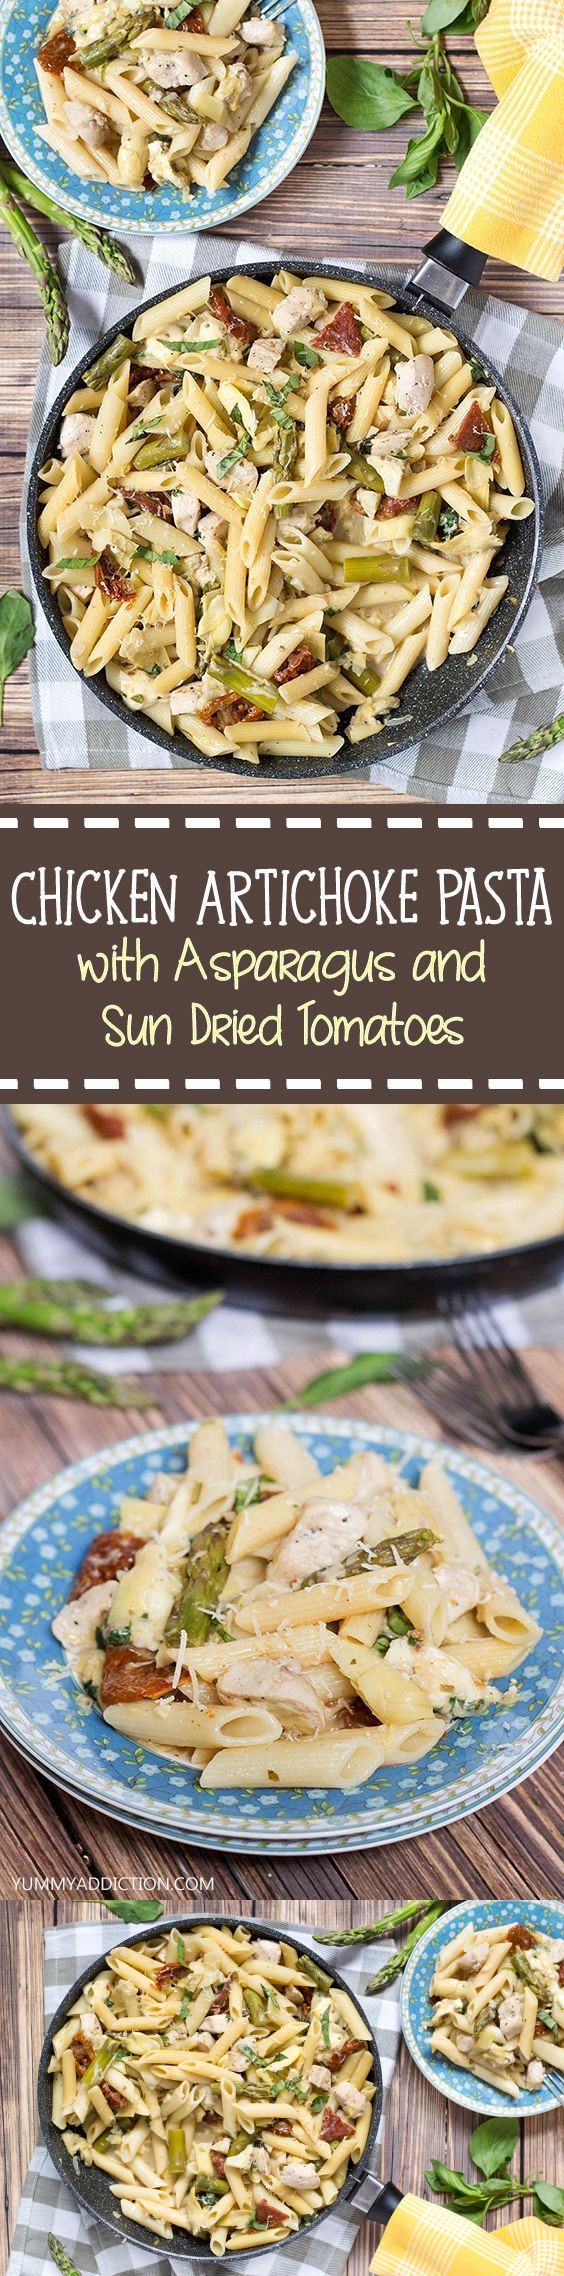 Chicken Artichoke Pasta with Asparagus & Sun-Dried Tomatoes